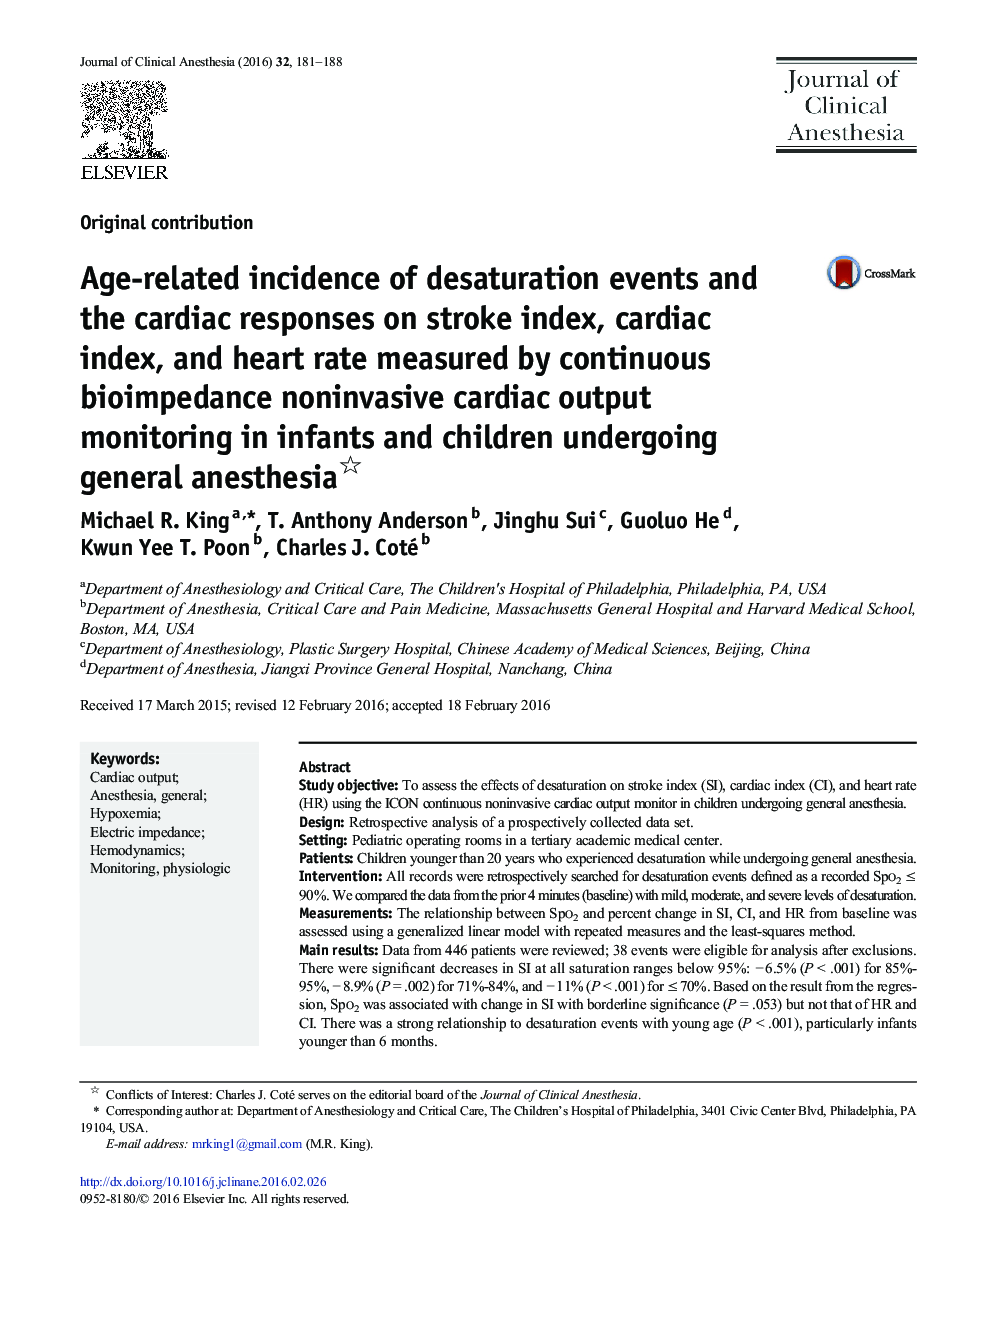 Age-related incidence of desaturation events and the cardiac responses on stroke index, cardiac index, and heart rate measured by continuous bioimpedance noninvasive cardiac output monitoring in infants and children undergoing general anesthesia